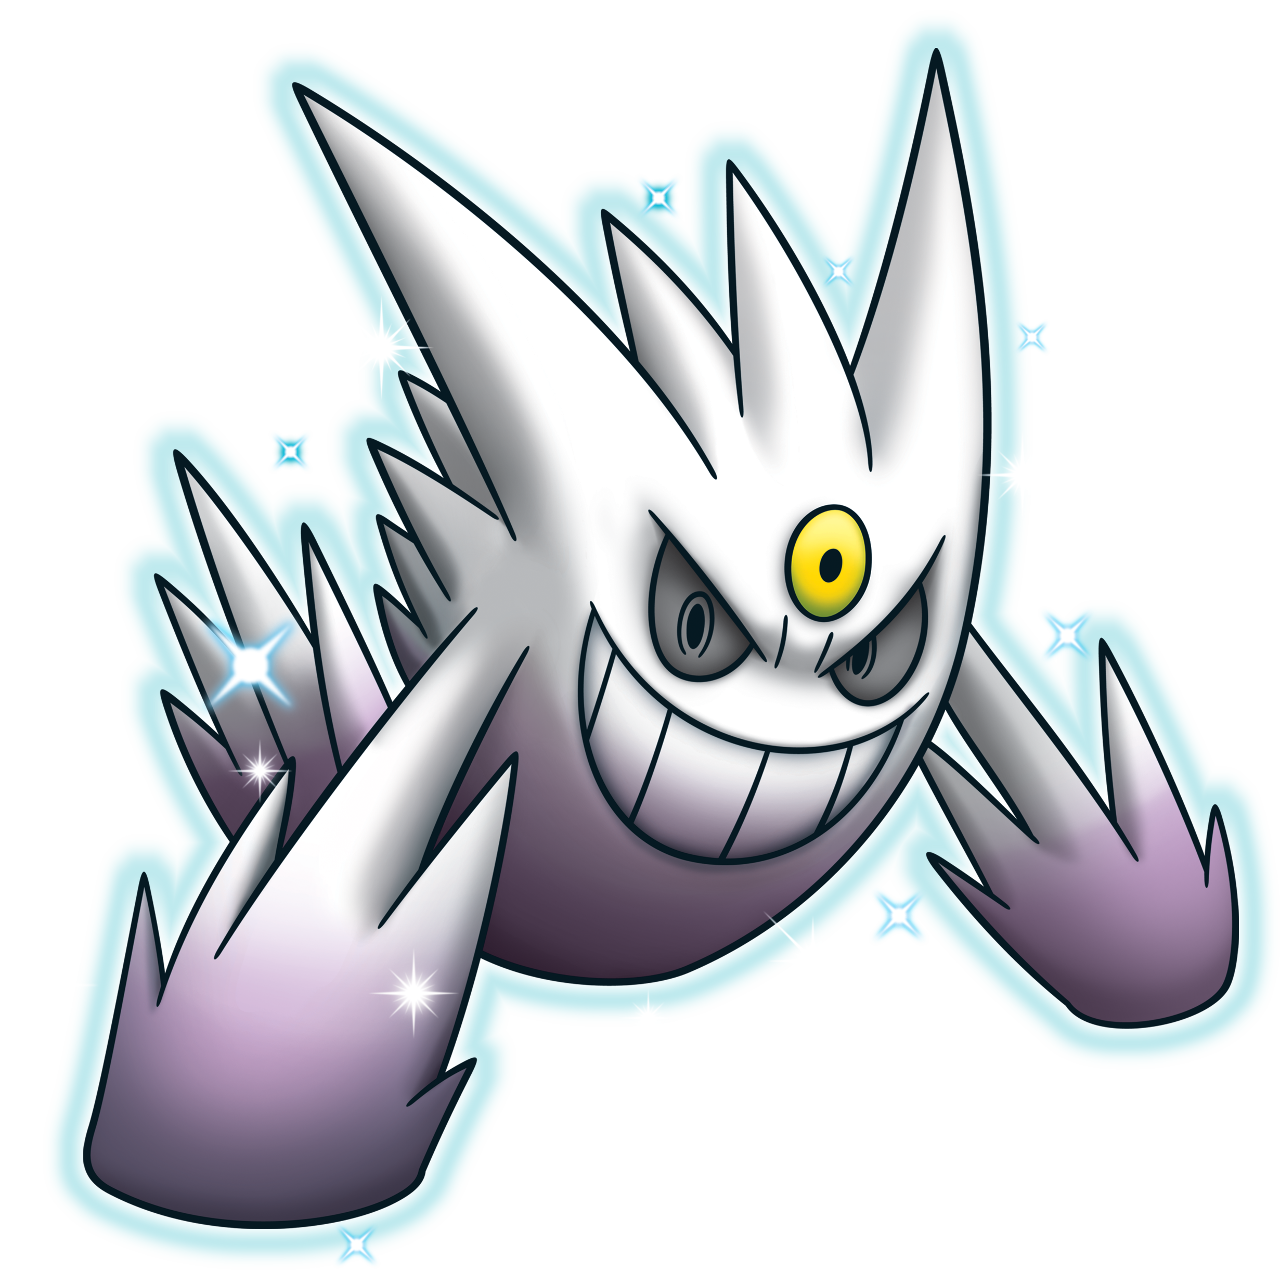 Shiny Gengar Available at Gamestop - Spooky Pokémon Arrived in Spirit of Halloween